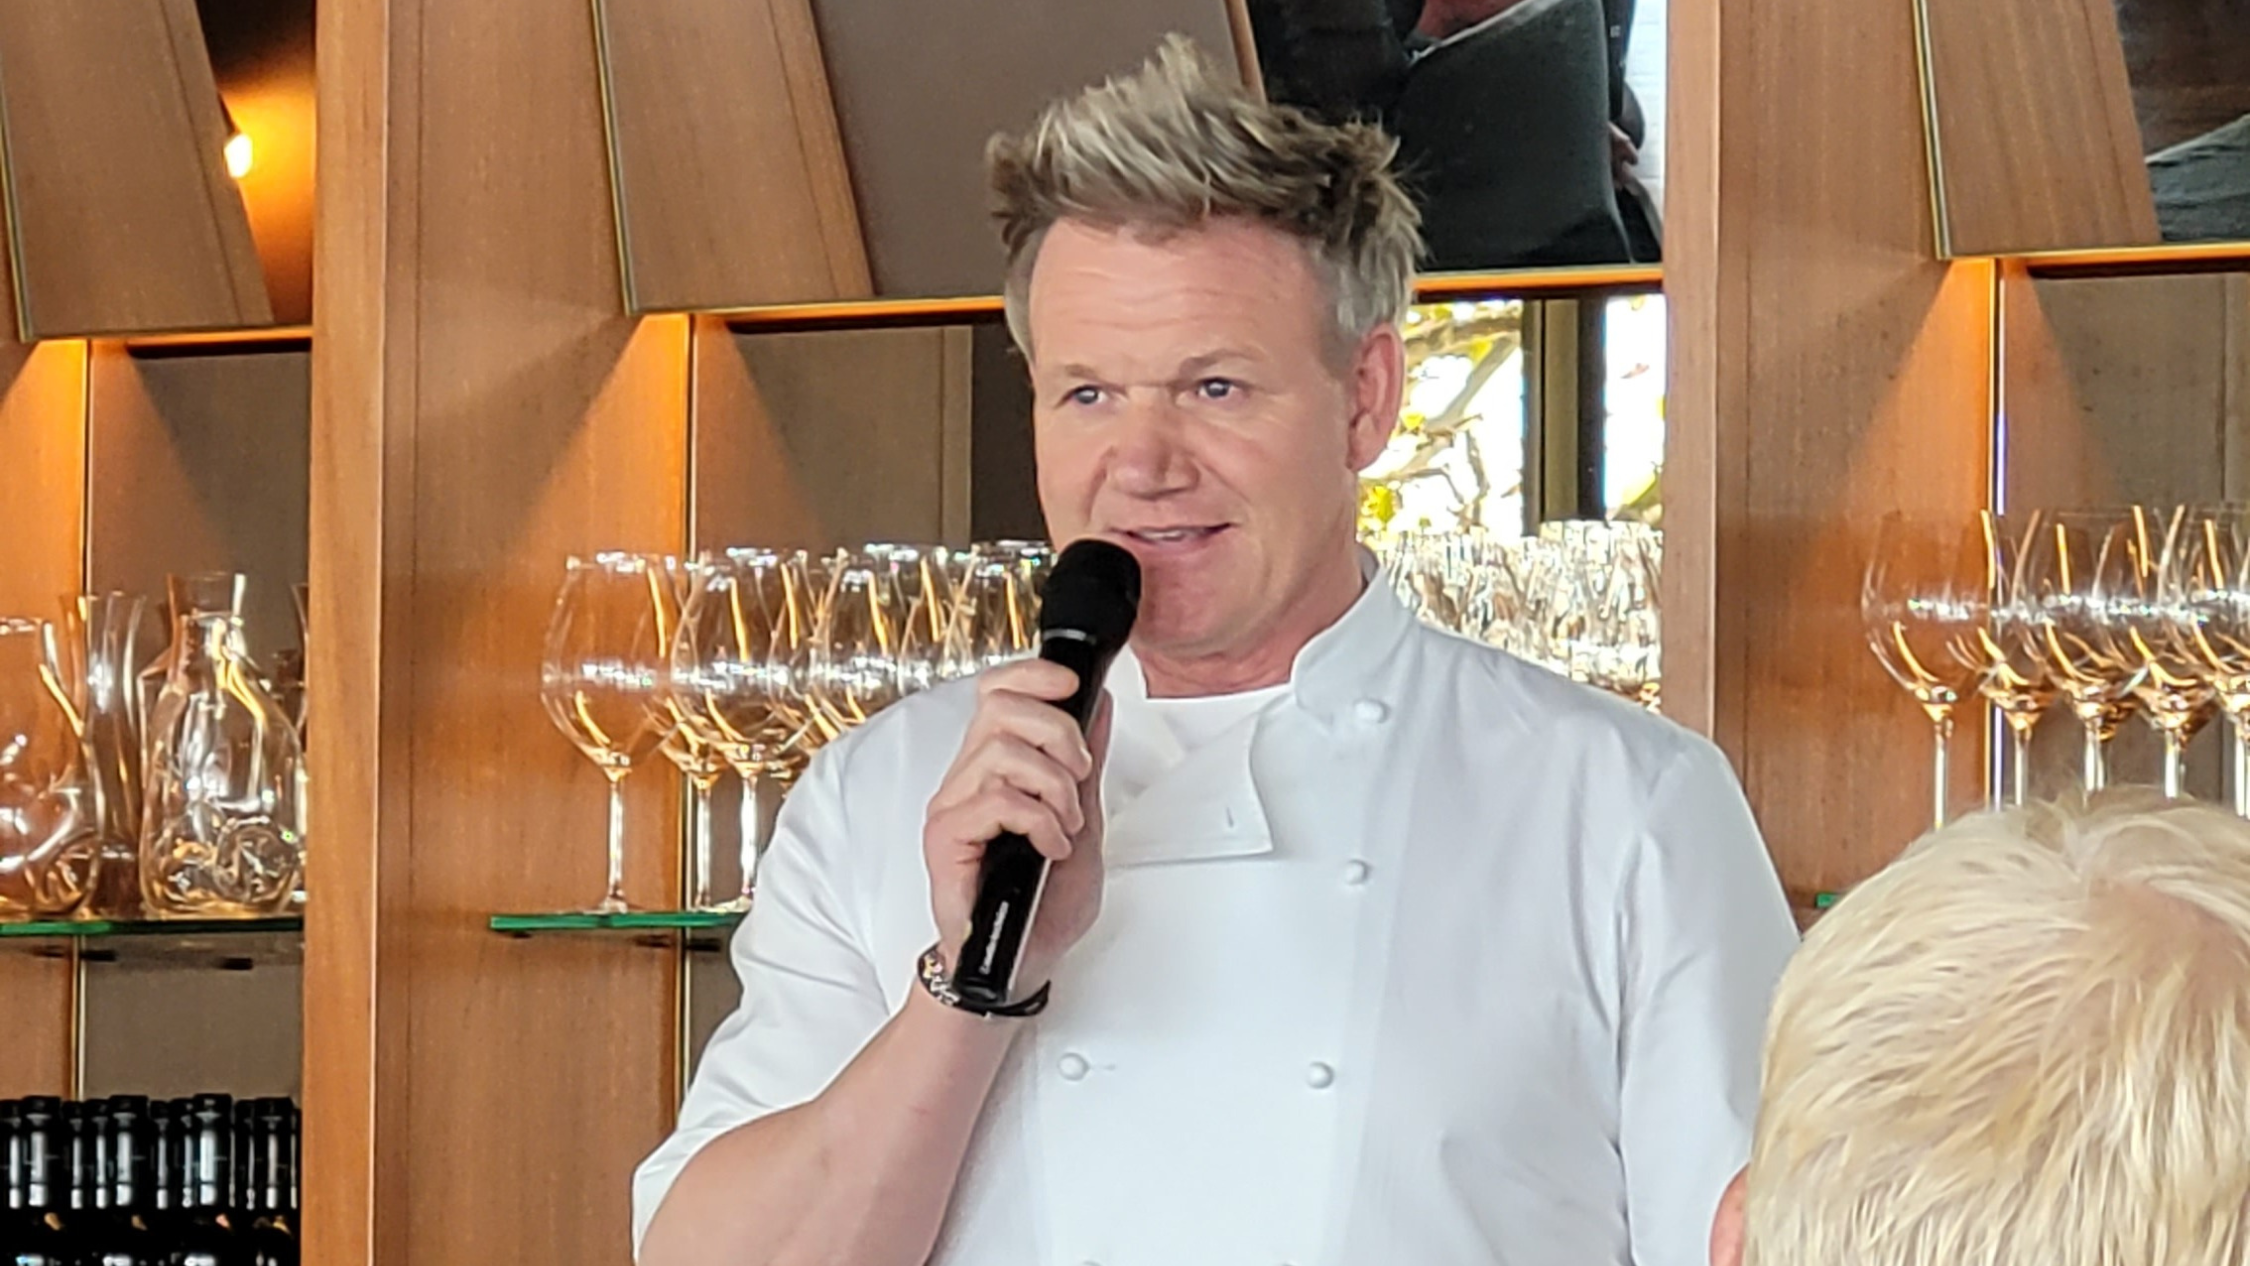 Here's how to cook a steak like Gordon Ramsay using wireless